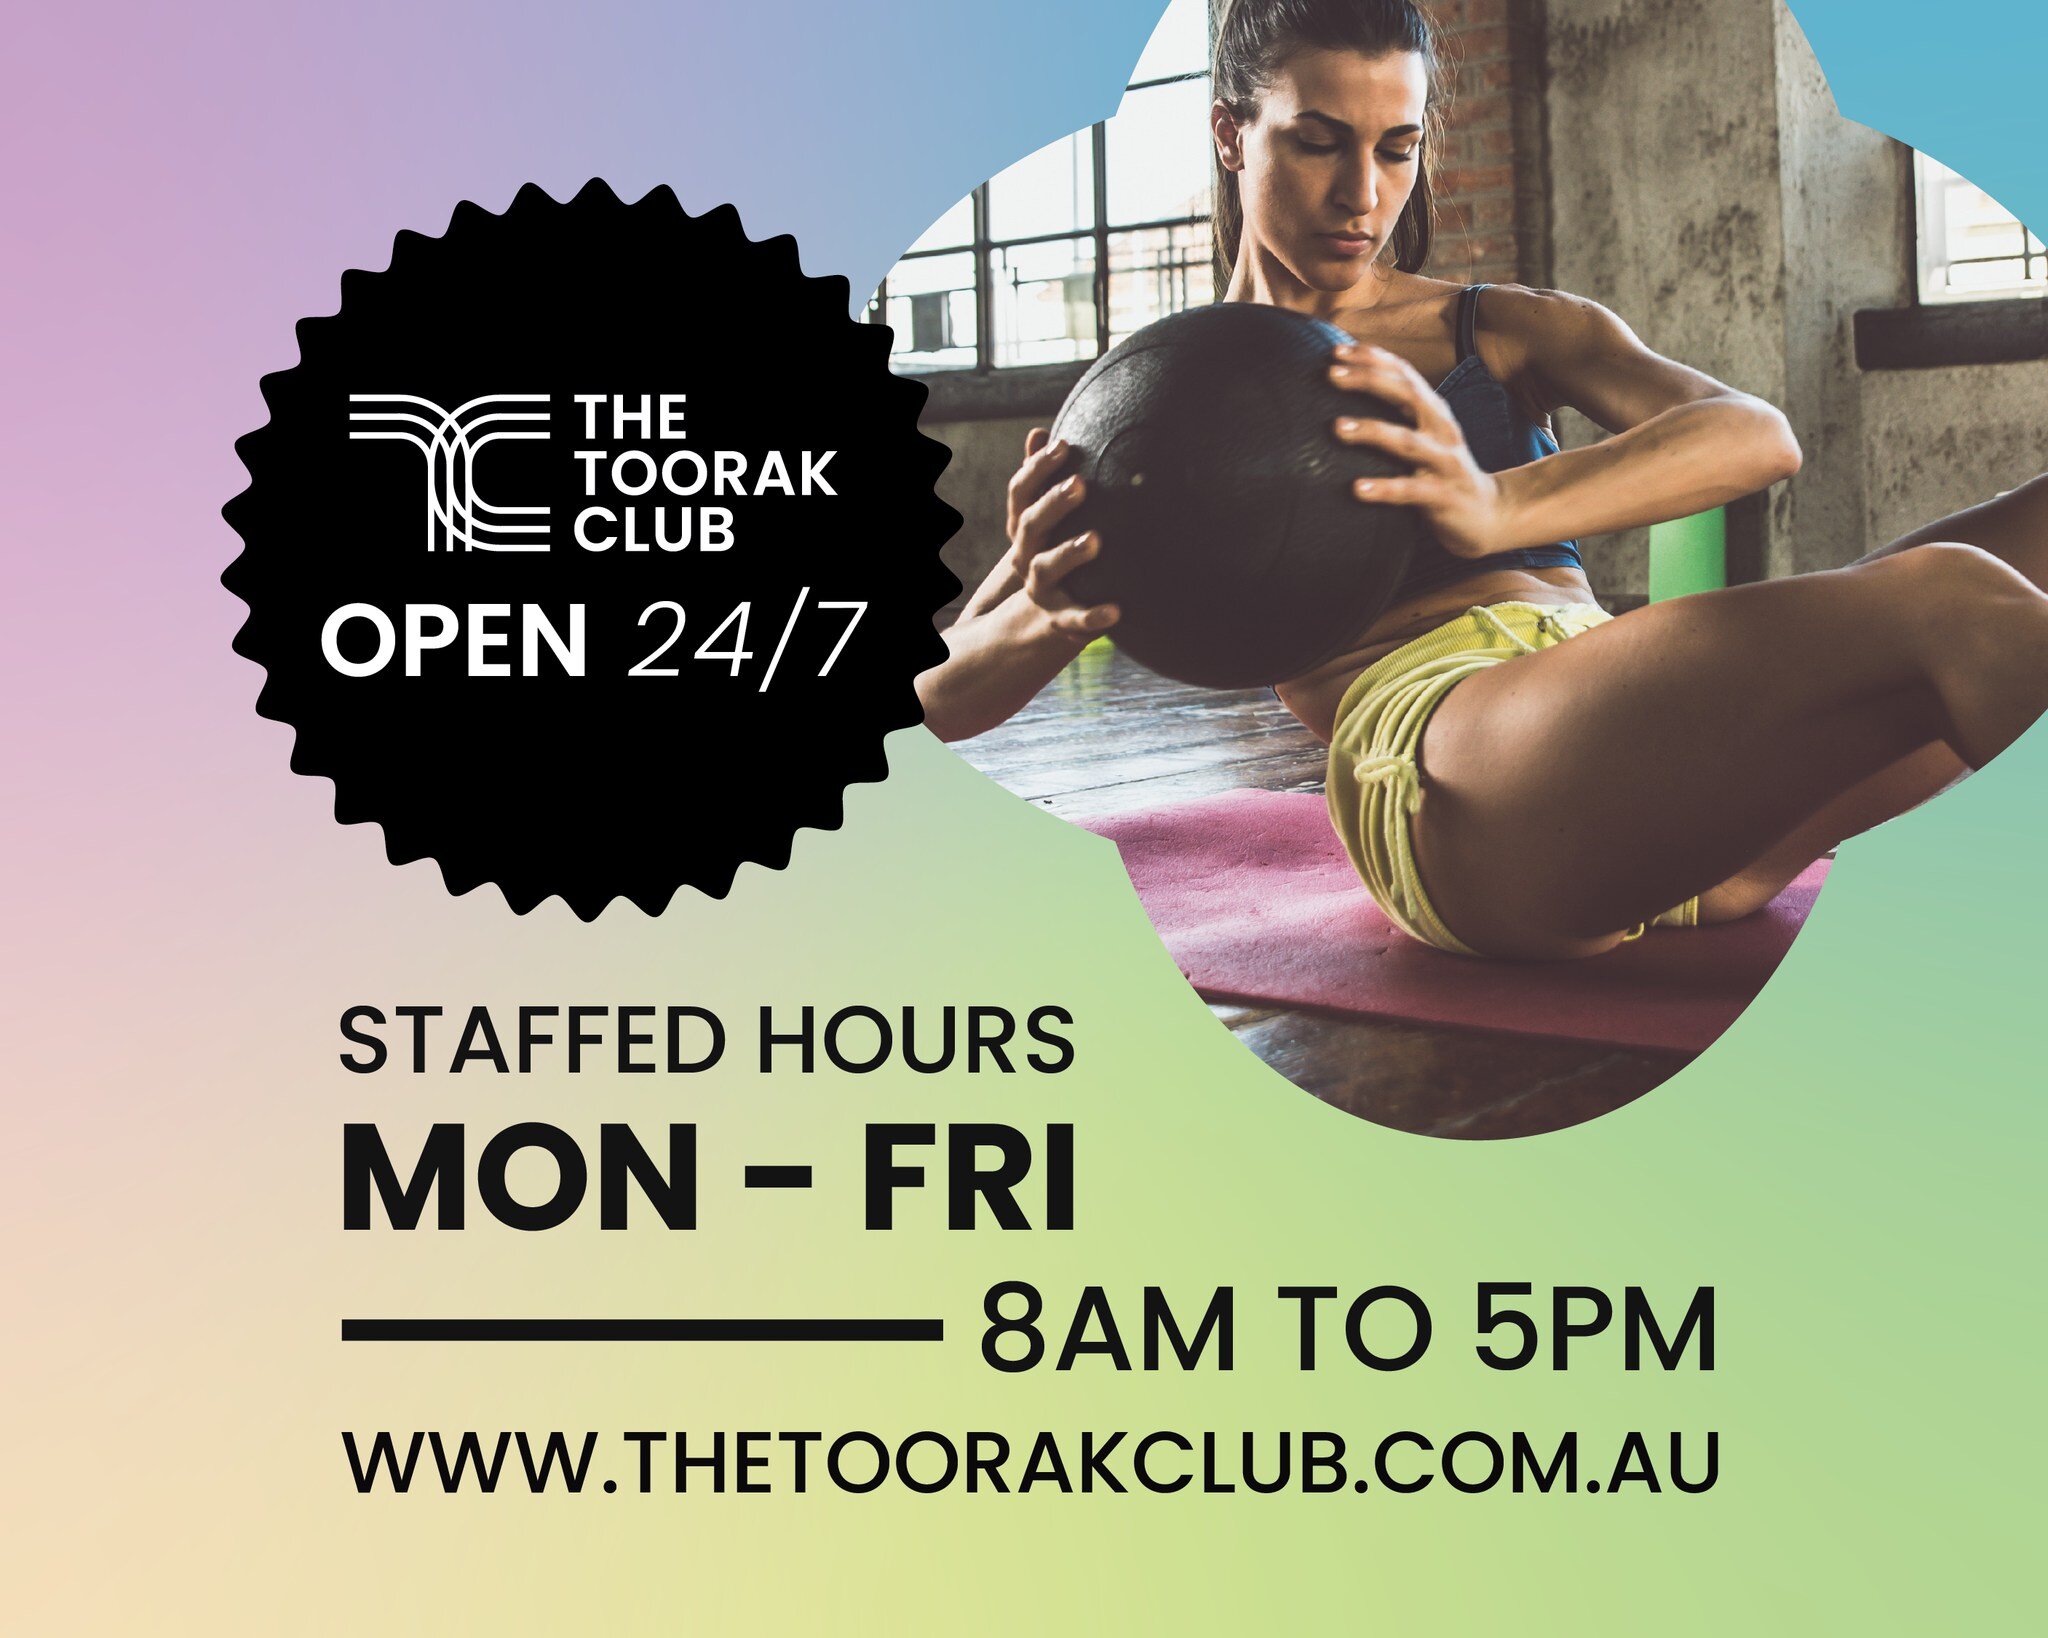 The Toorak Club is staffed during the week from 8am to 5pm. We're here to help!

#thetoorakclub247

☎️ 03 9941 3141
📧 manager@thetoorakclub.com.au
💻 www.thetoorakclub.com.au

#fitness #toorakvillage #toorakgym #fitnessmelbourne #stayfit #melbourneg